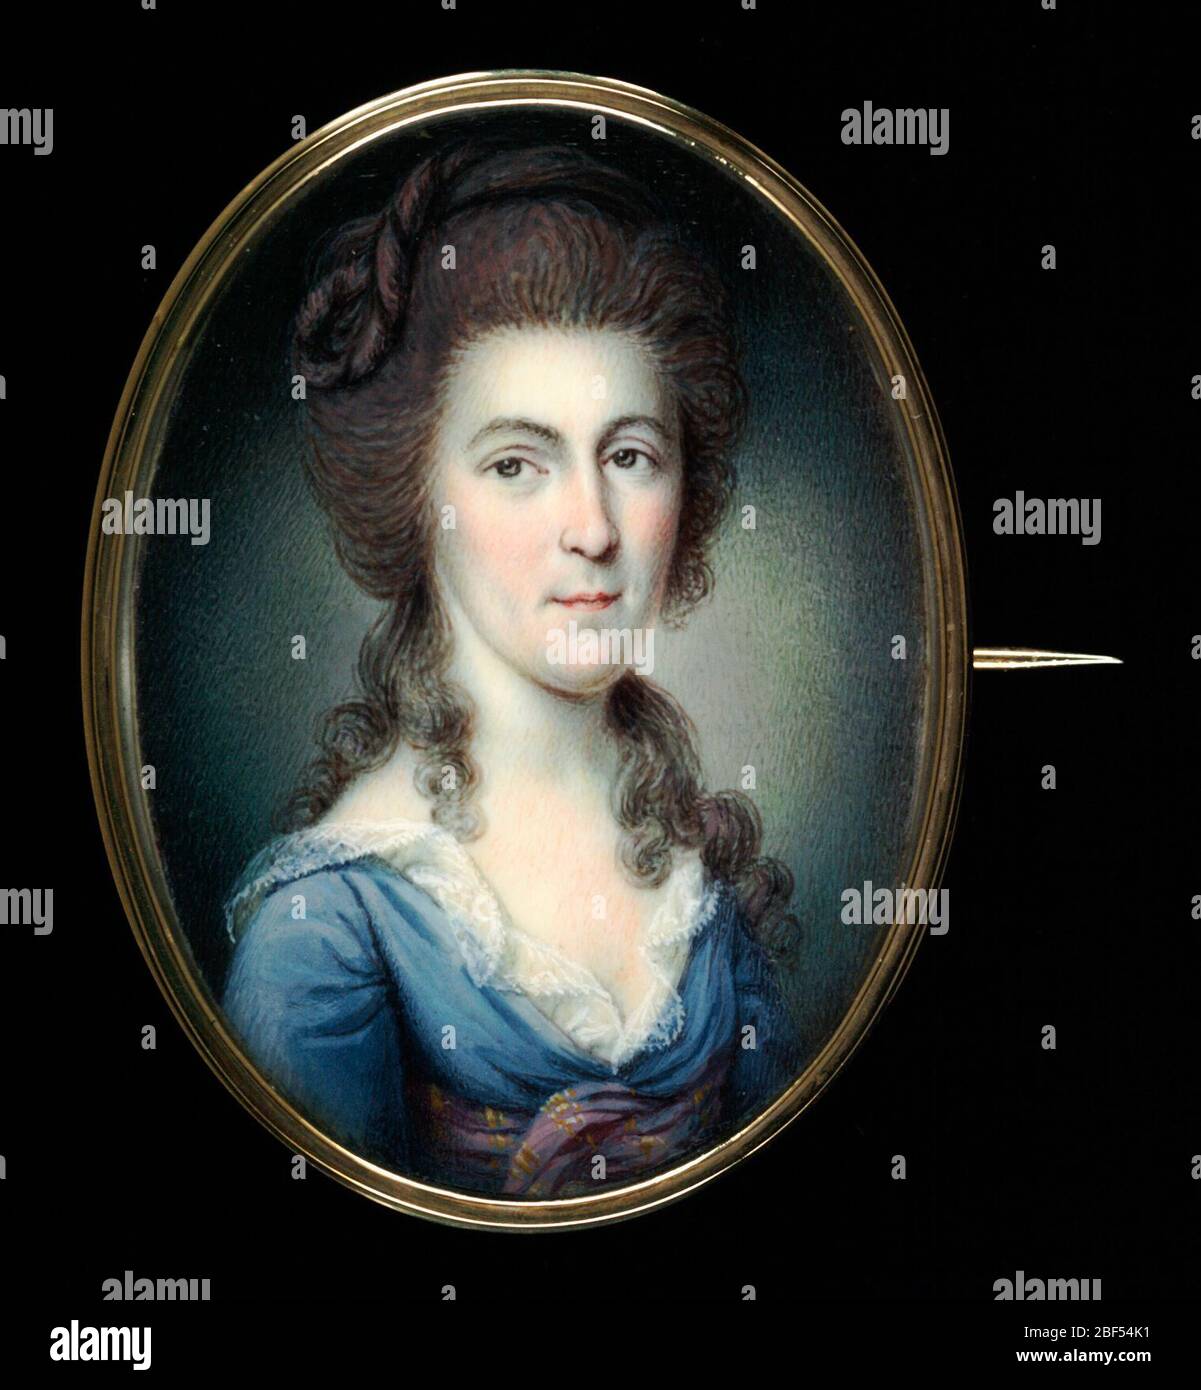 Susanne Correy. Susanne Correy (1749-about 1812) married Colonel James Read (1743-1822) in 1770. Read served in the Continental army and fought at the Battle of Camden in South Carolina. He later went on to become head of the Navy Board in 1781. Stock Photo